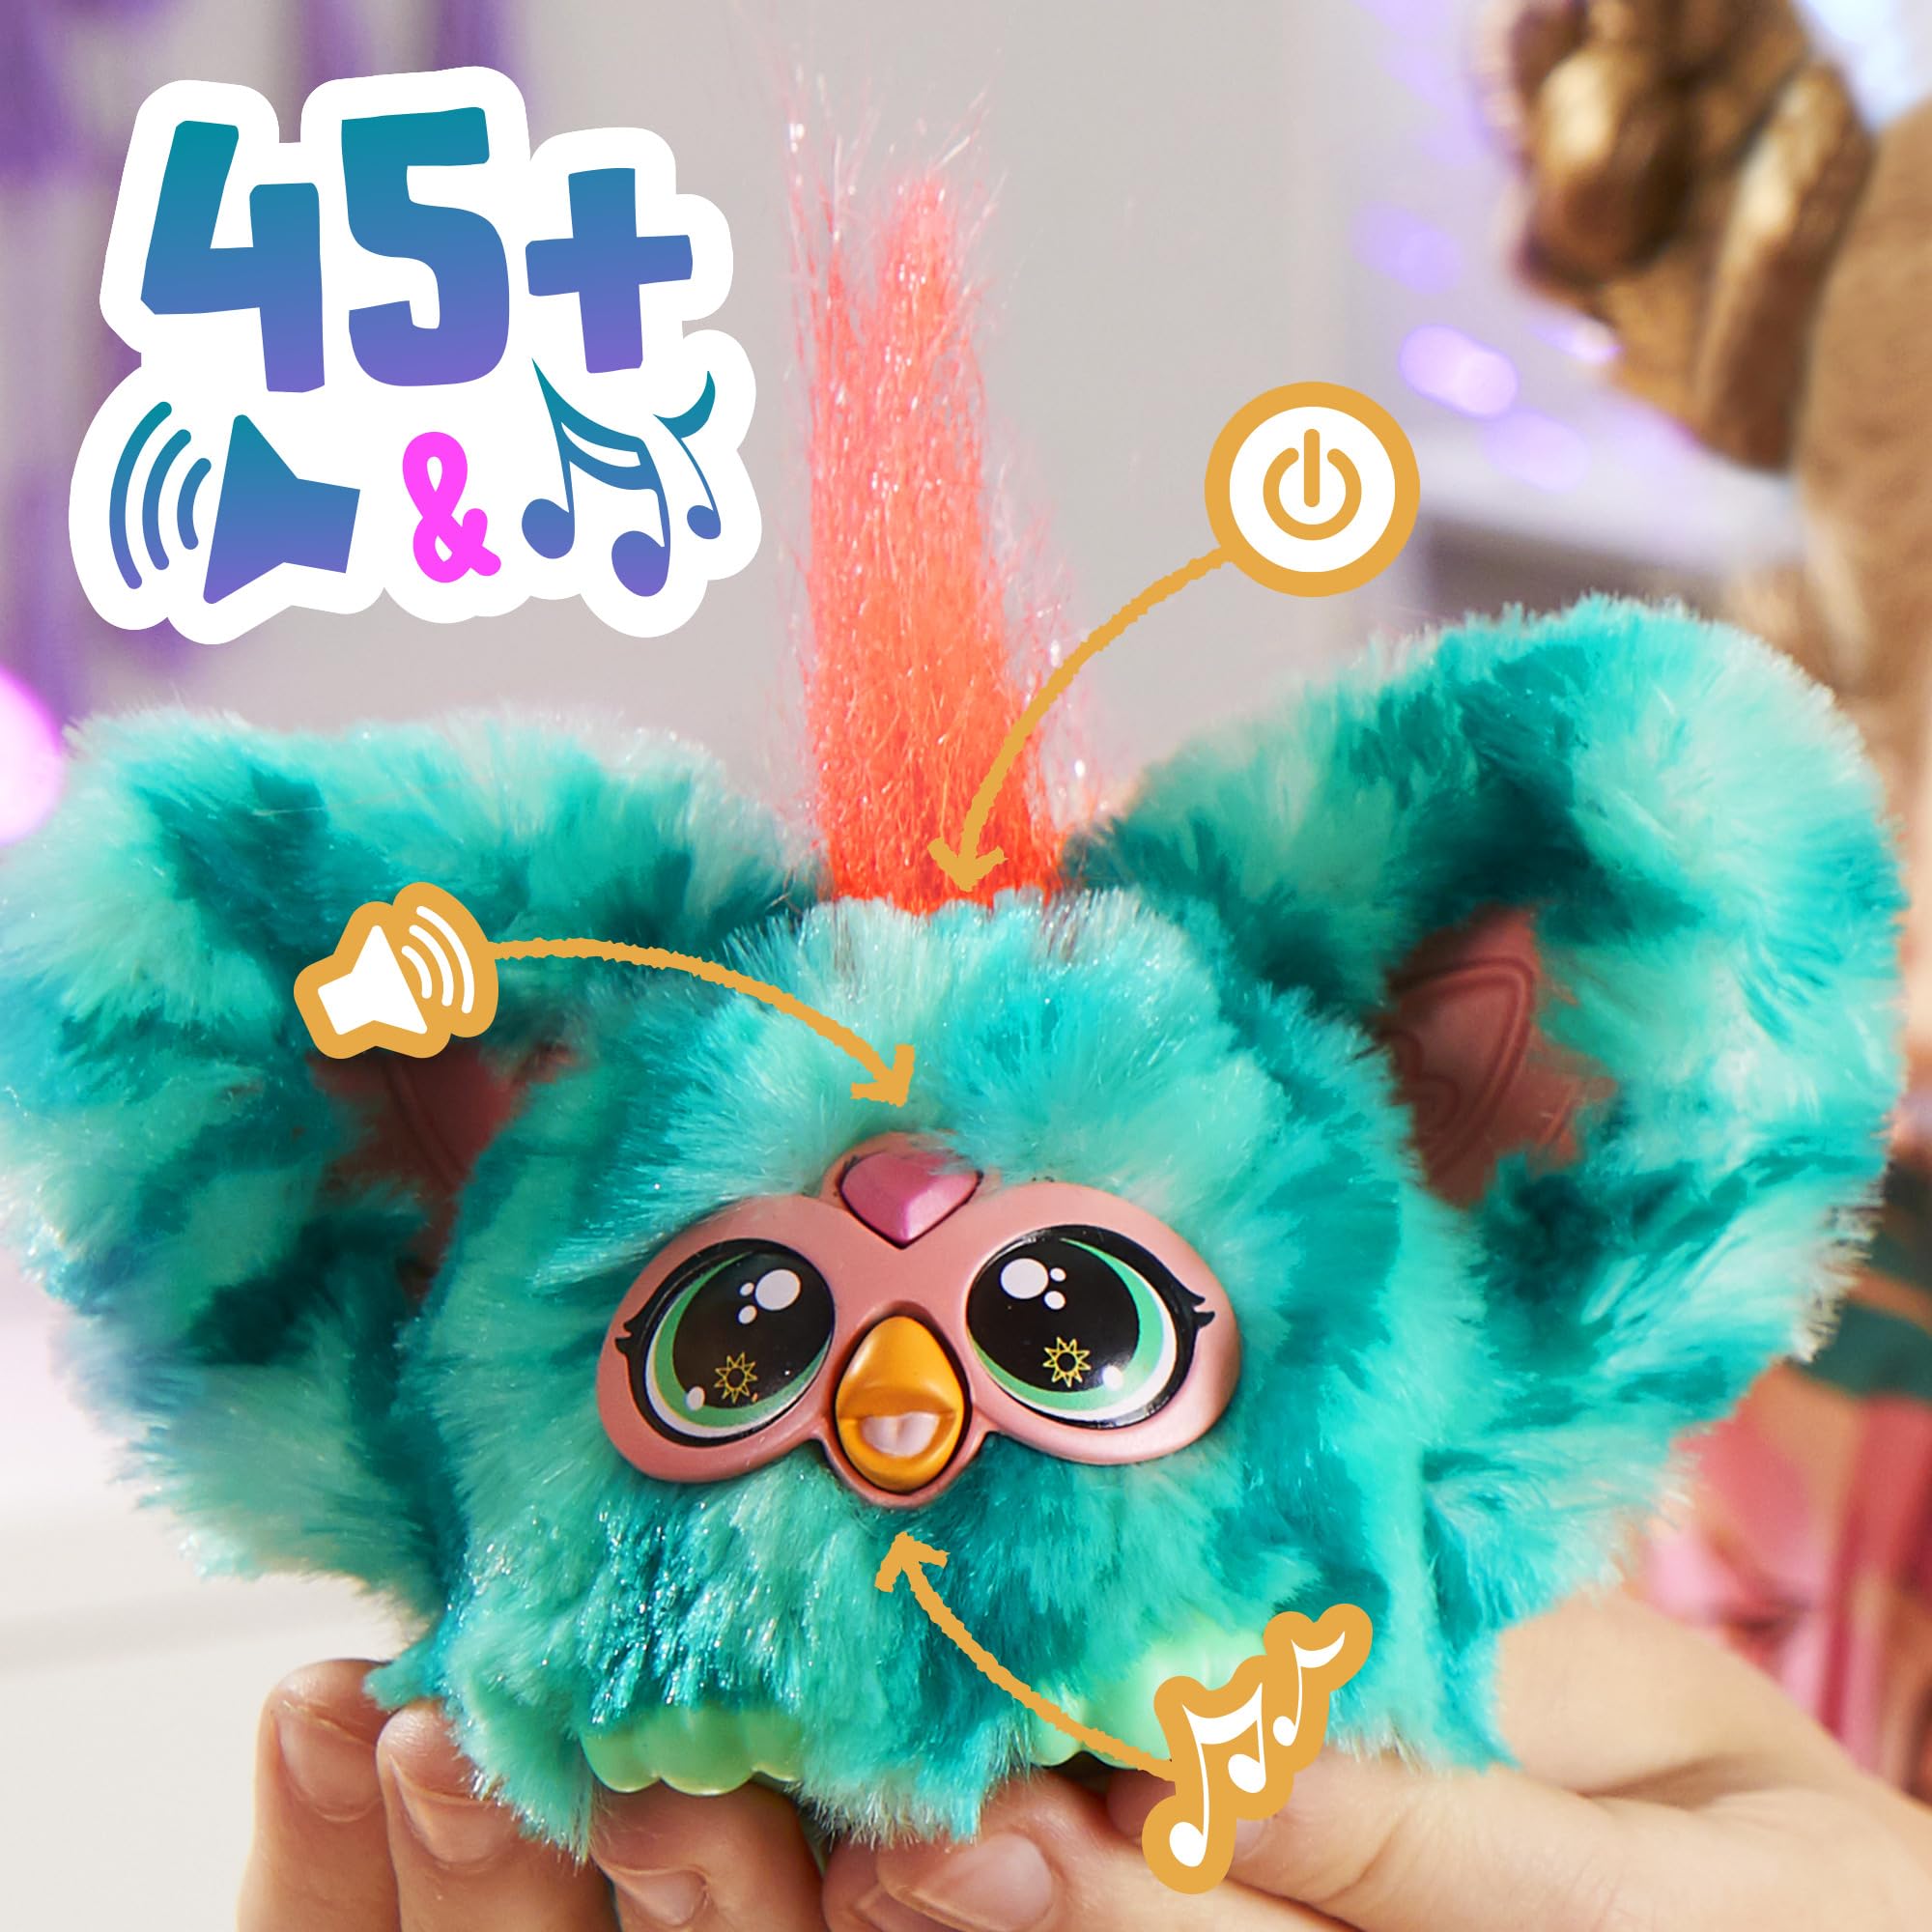 Furby Furblets Mello-Nee Mini Friend, 45+ Sounds, Summer Chill Music & Furbish Phrases, Electronic Plush Toys for Girls & Boys 6 Years & Up, Watermelon Red & Green